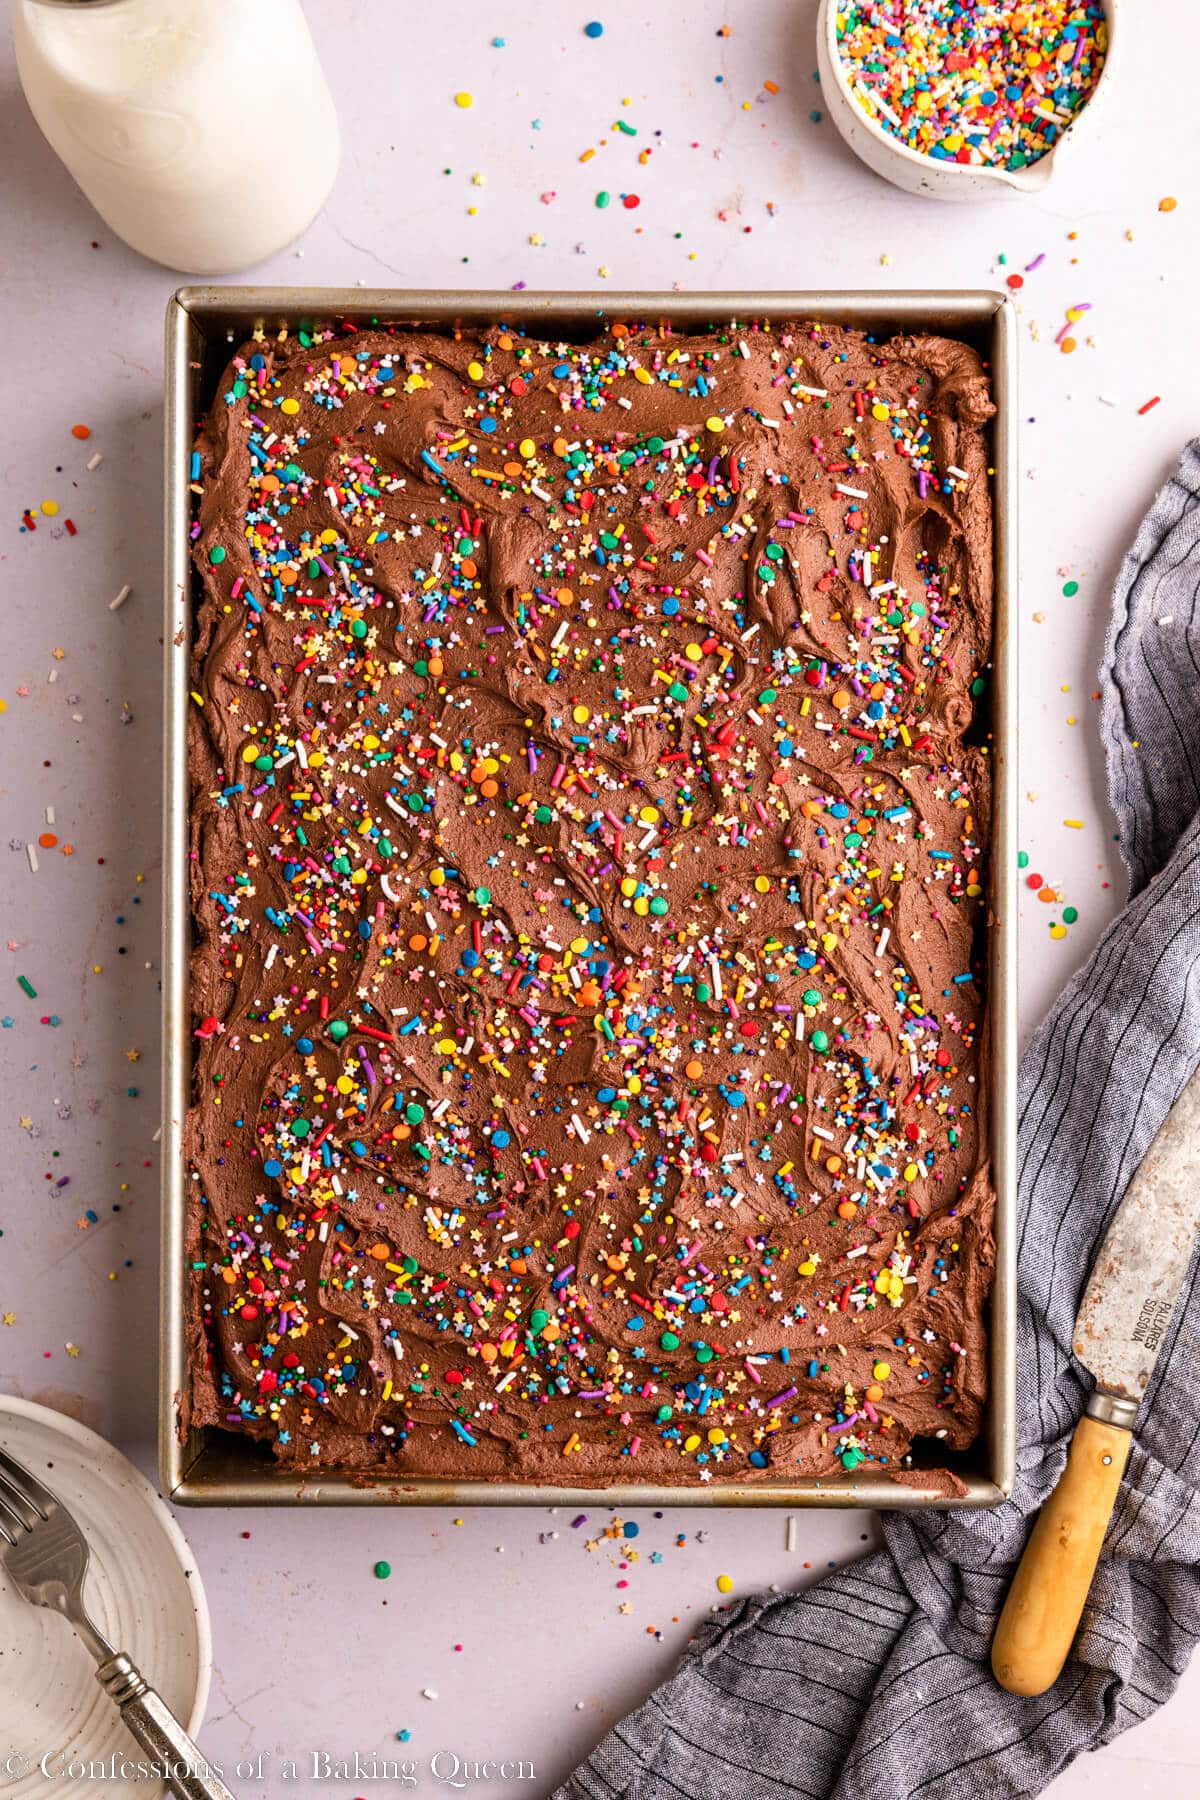 chocolate sheet cake decorated with sprinkles in a metal pan on a light surface with a blue linen, cup of sprinkles, glass of milk and plate with fork